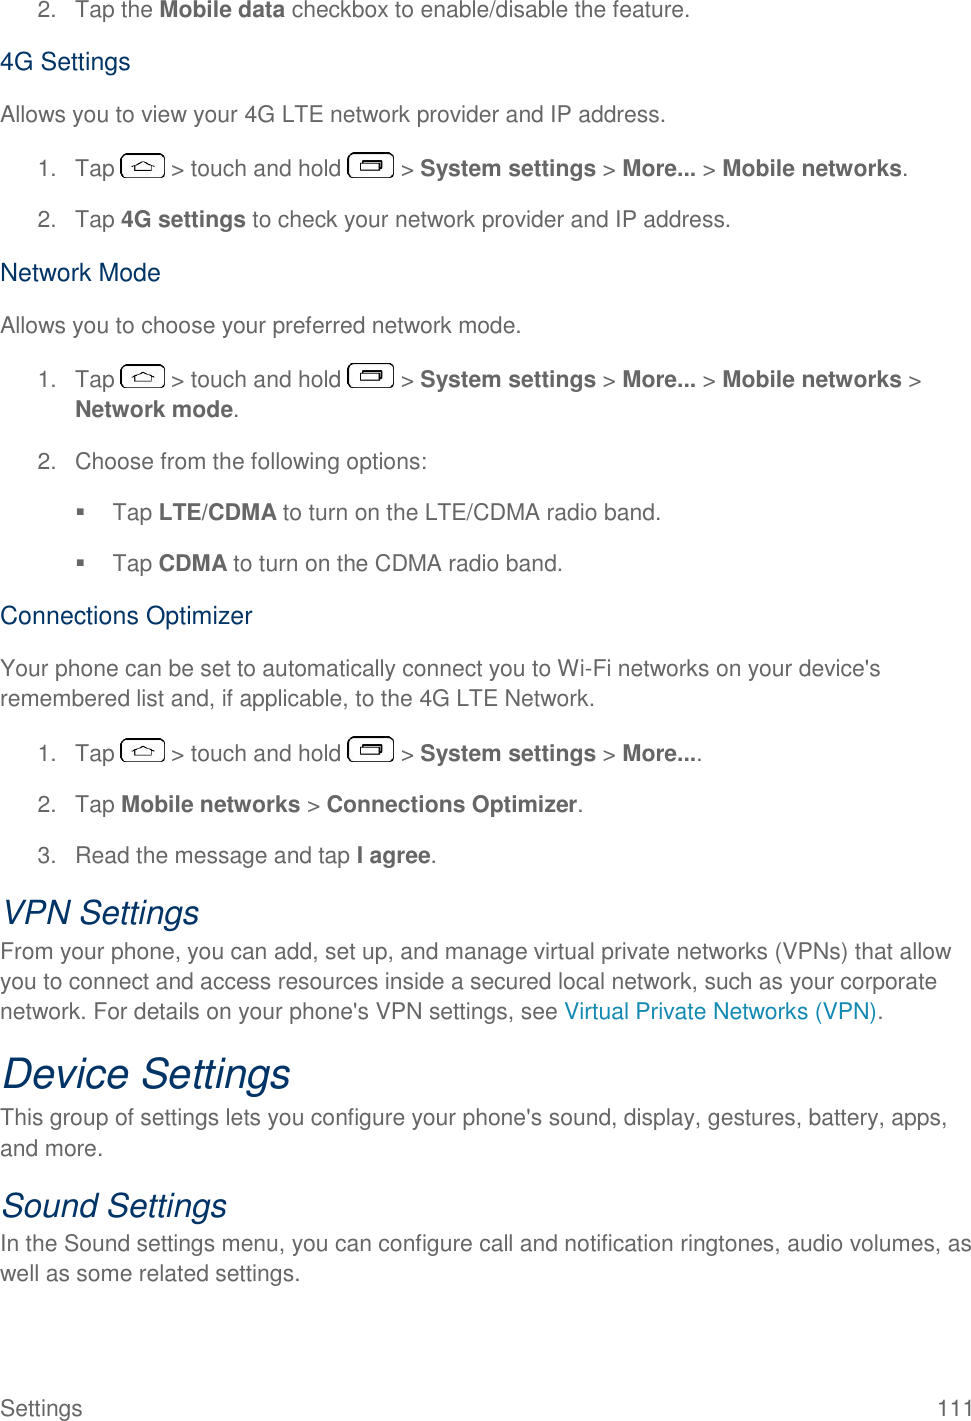  Settings  111 2.  Tap the Mobile data checkbox to enable/disable the feature. 4G Settings Allows you to view your 4G LTE network provider and IP address. 1.  Tap   &gt; touch and hold   &gt; System settings &gt; More... &gt; Mobile networks. 2.  Tap 4G settings to check your network provider and IP address. Network Mode Allows you to choose your preferred network mode. 1.  Tap   &gt; touch and hold   &gt; System settings &gt; More... &gt; Mobile networks &gt; Network mode. 2.  Choose from the following options:   Tap LTE/CDMA to turn on the LTE/CDMA radio band.   Tap CDMA to turn on the CDMA radio band. Connections Optimizer Your phone can be set to automatically connect you to Wi-Fi networks on your device&apos;s remembered list and, if applicable, to the 4G LTE Network. 1.  Tap   &gt; touch and hold   &gt; System settings &gt; More.... 2.  Tap Mobile networks &gt; Connections Optimizer. 3.  Read the message and tap I agree. VPN Settings From your phone, you can add, set up, and manage virtual private networks (VPNs) that allow you to connect and access resources inside a secured local network, such as your corporate network. For details on your phone&apos;s VPN settings, see Virtual Private Networks (VPN). Device Settings This group of settings lets you configure your phone&apos;s sound, display, gestures, battery, apps, and more. Sound Settings In the Sound settings menu, you can configure call and notification ringtones, audio volumes, as well as some related settings. 